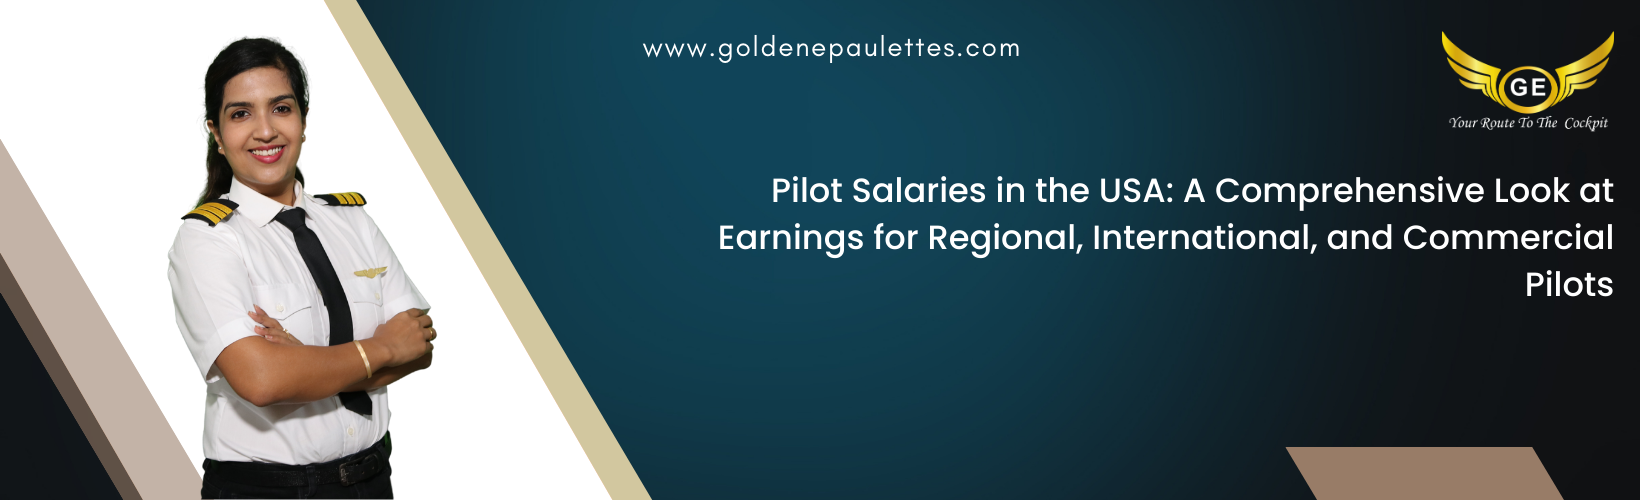 The Different Pilot Salaries in the USA